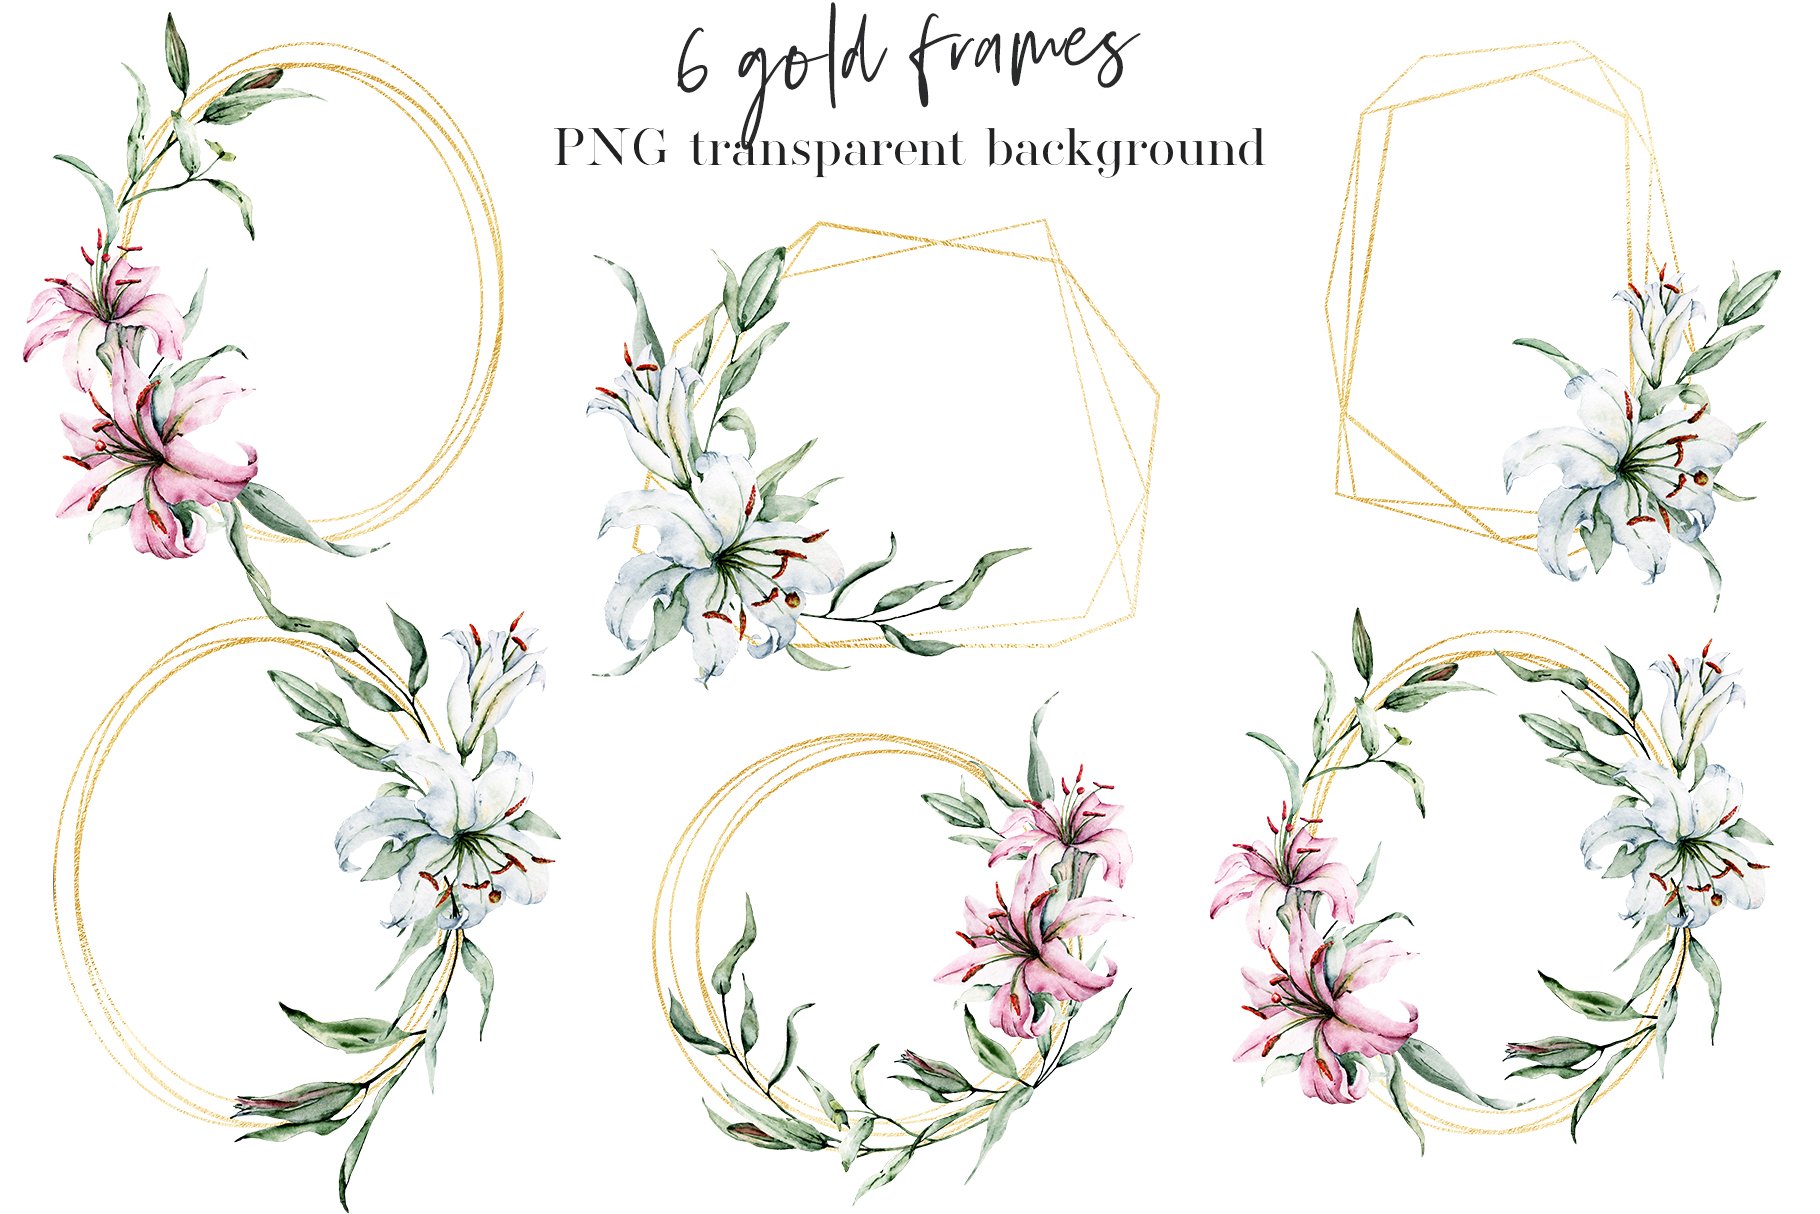 This bundle contains 6 gold frames with floral elements.